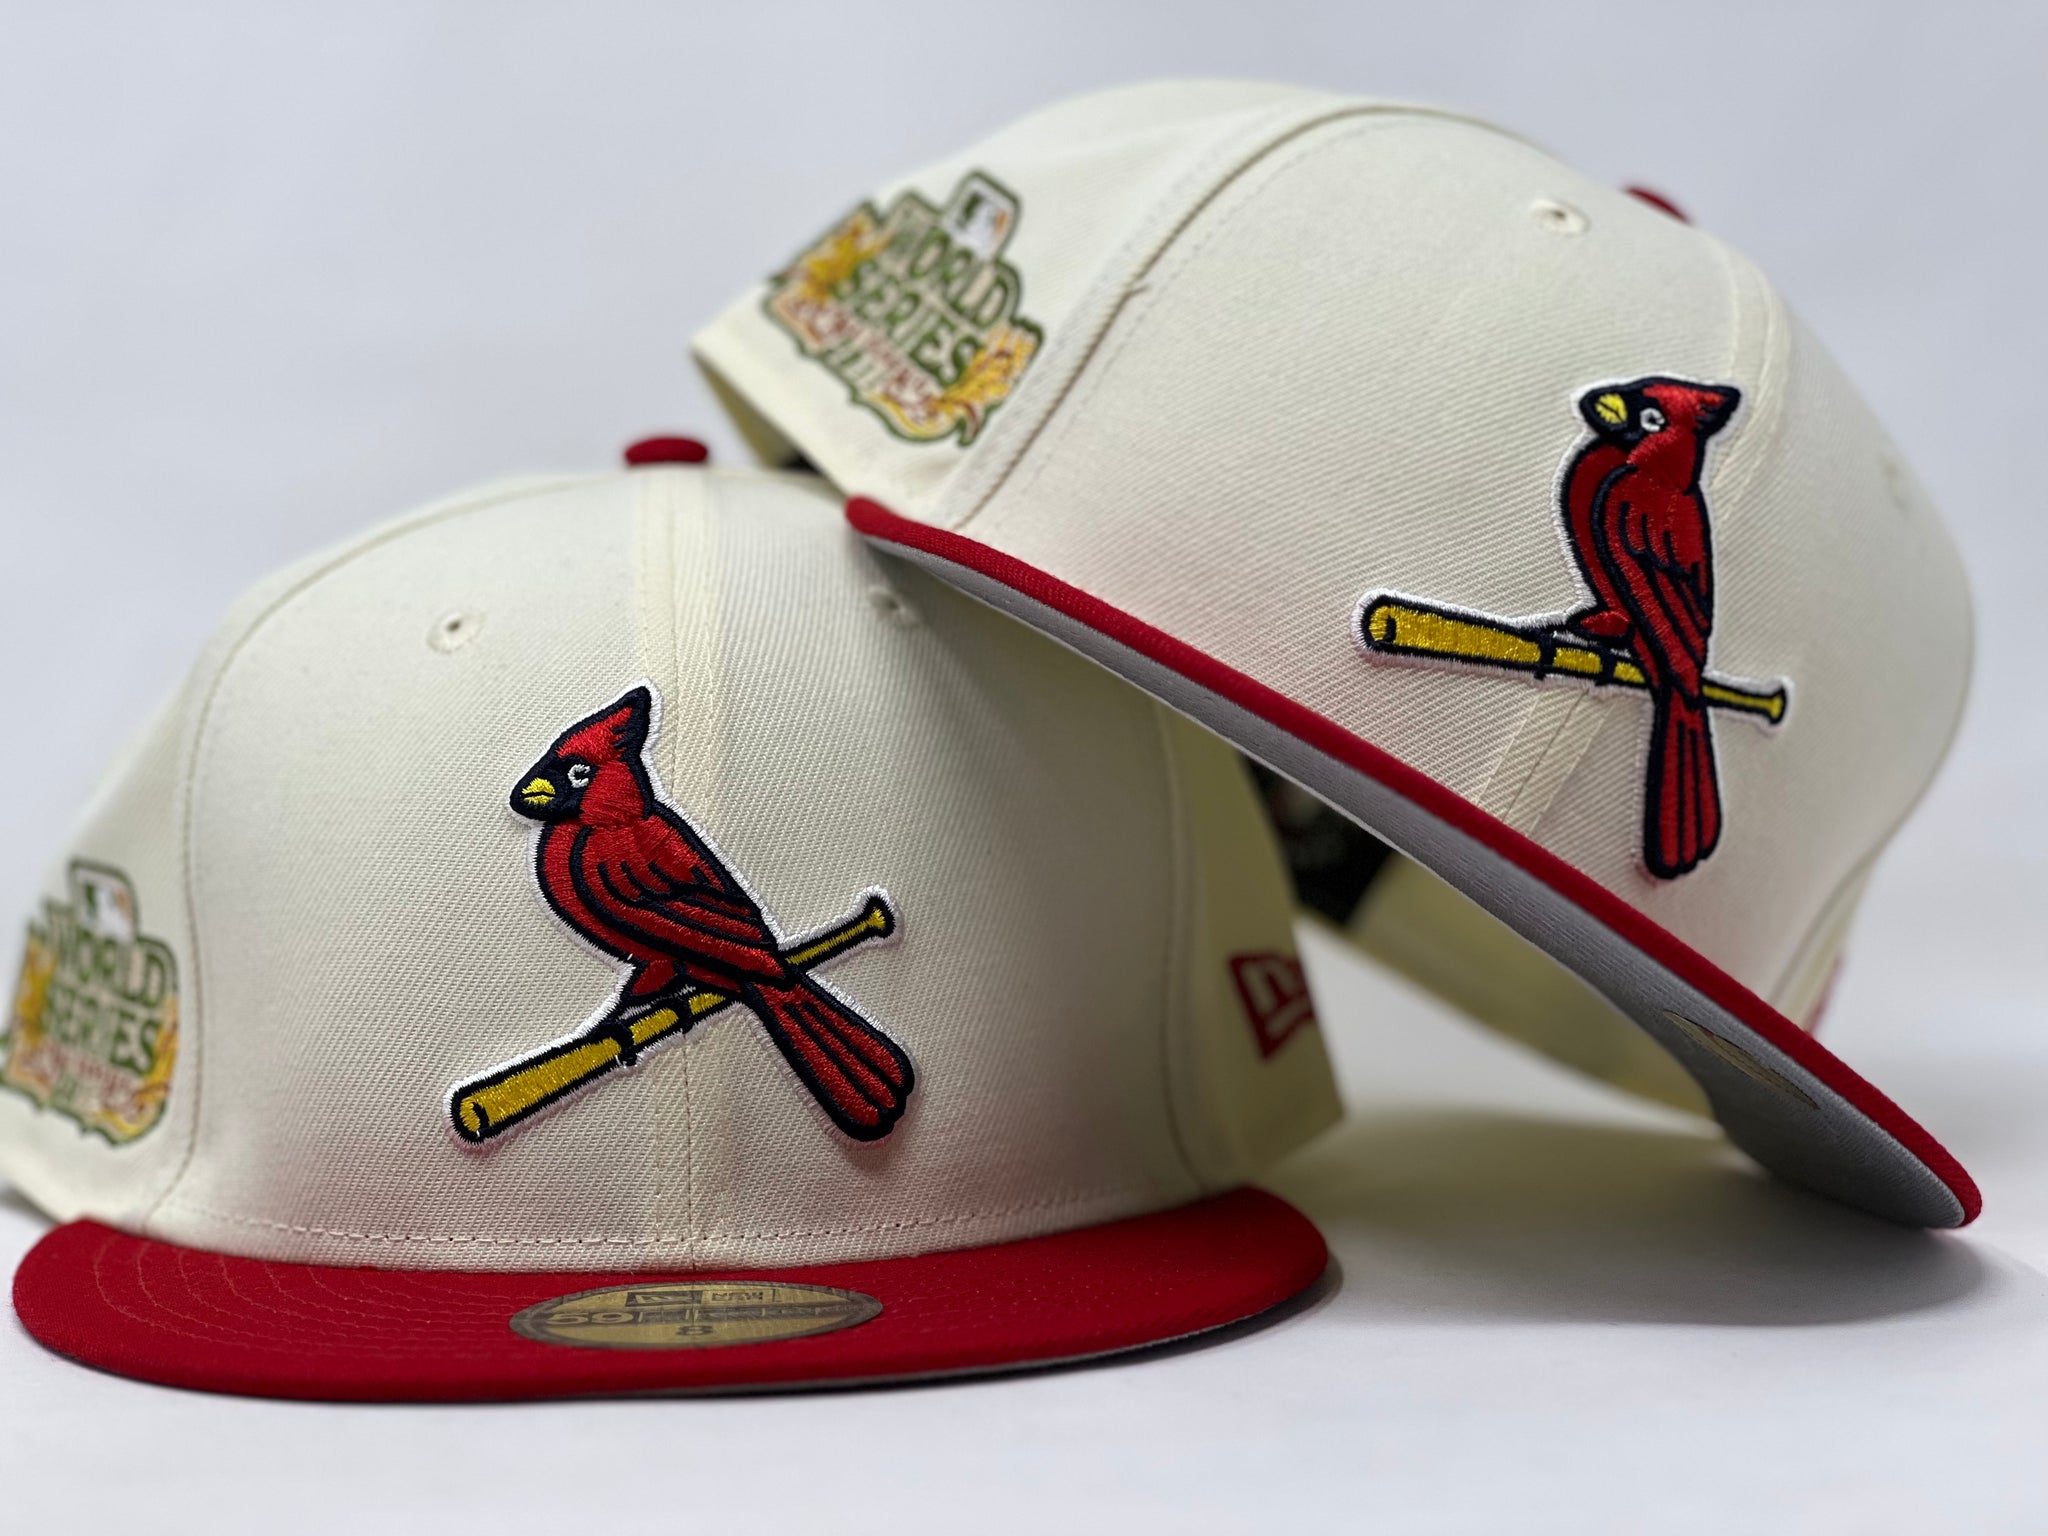 Men's New Era Pink St. Louis Cardinals 2011 MLB World Series 59FIFTY Fitted Hat